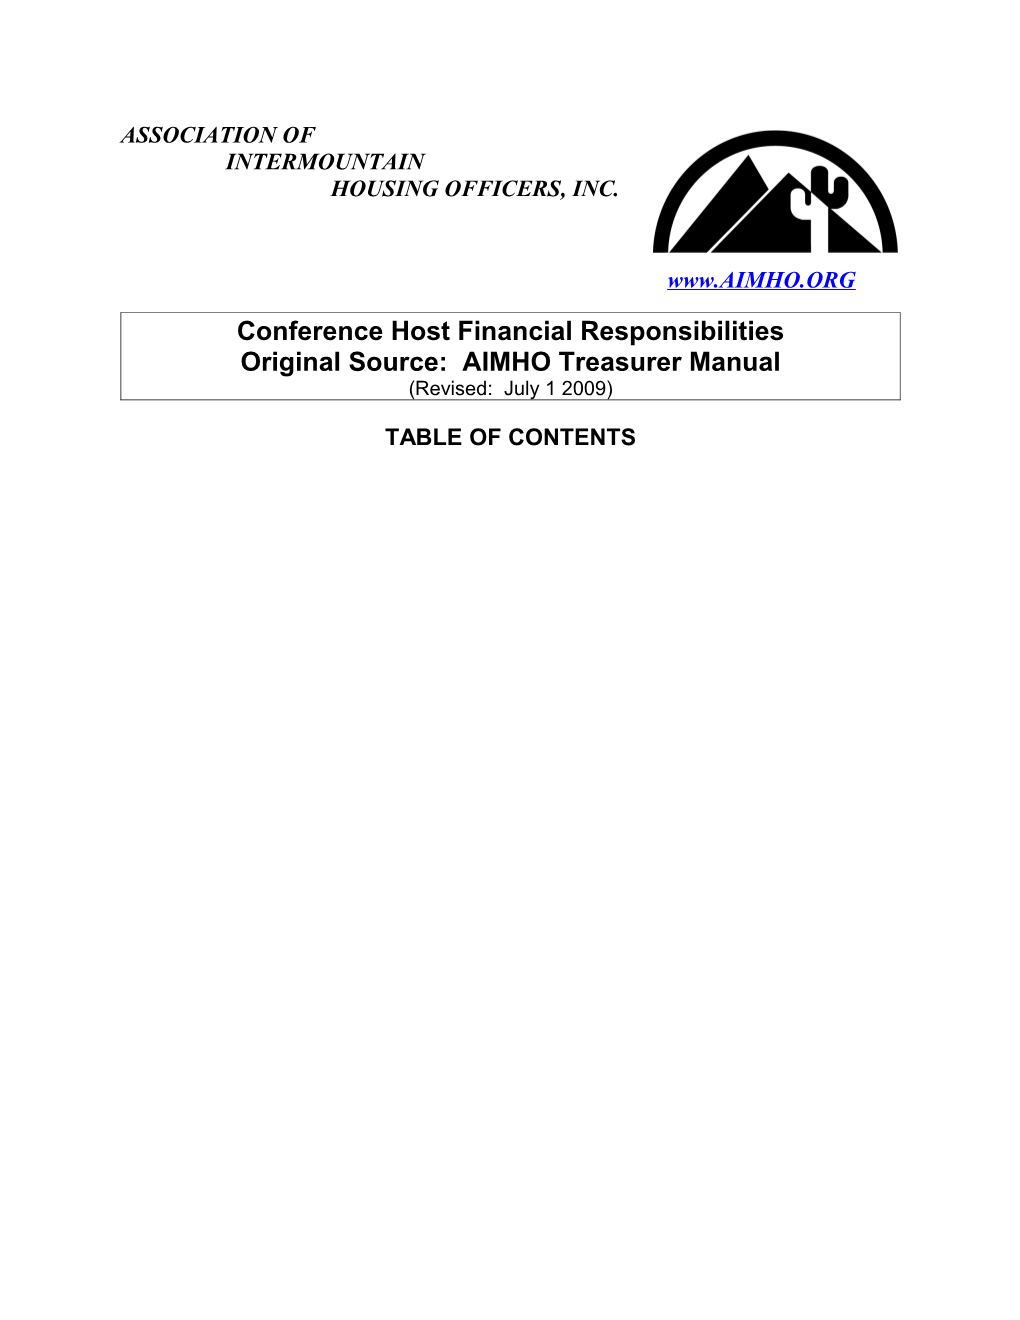 Conference Host Financial Responsibilities